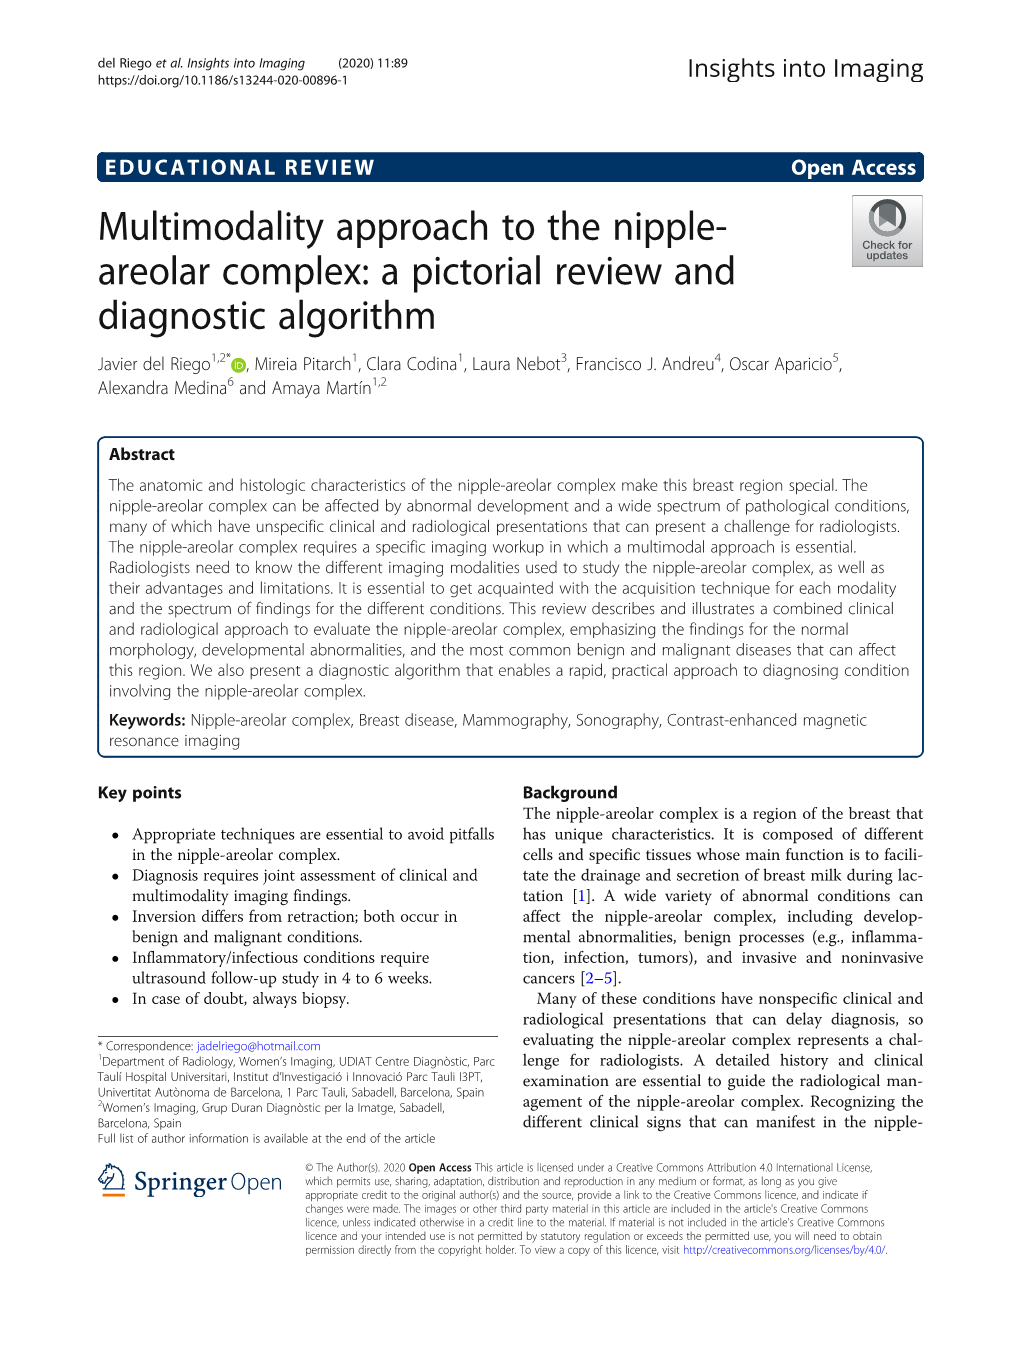 Multimodality Approach to the Nipple-Areolar Complex